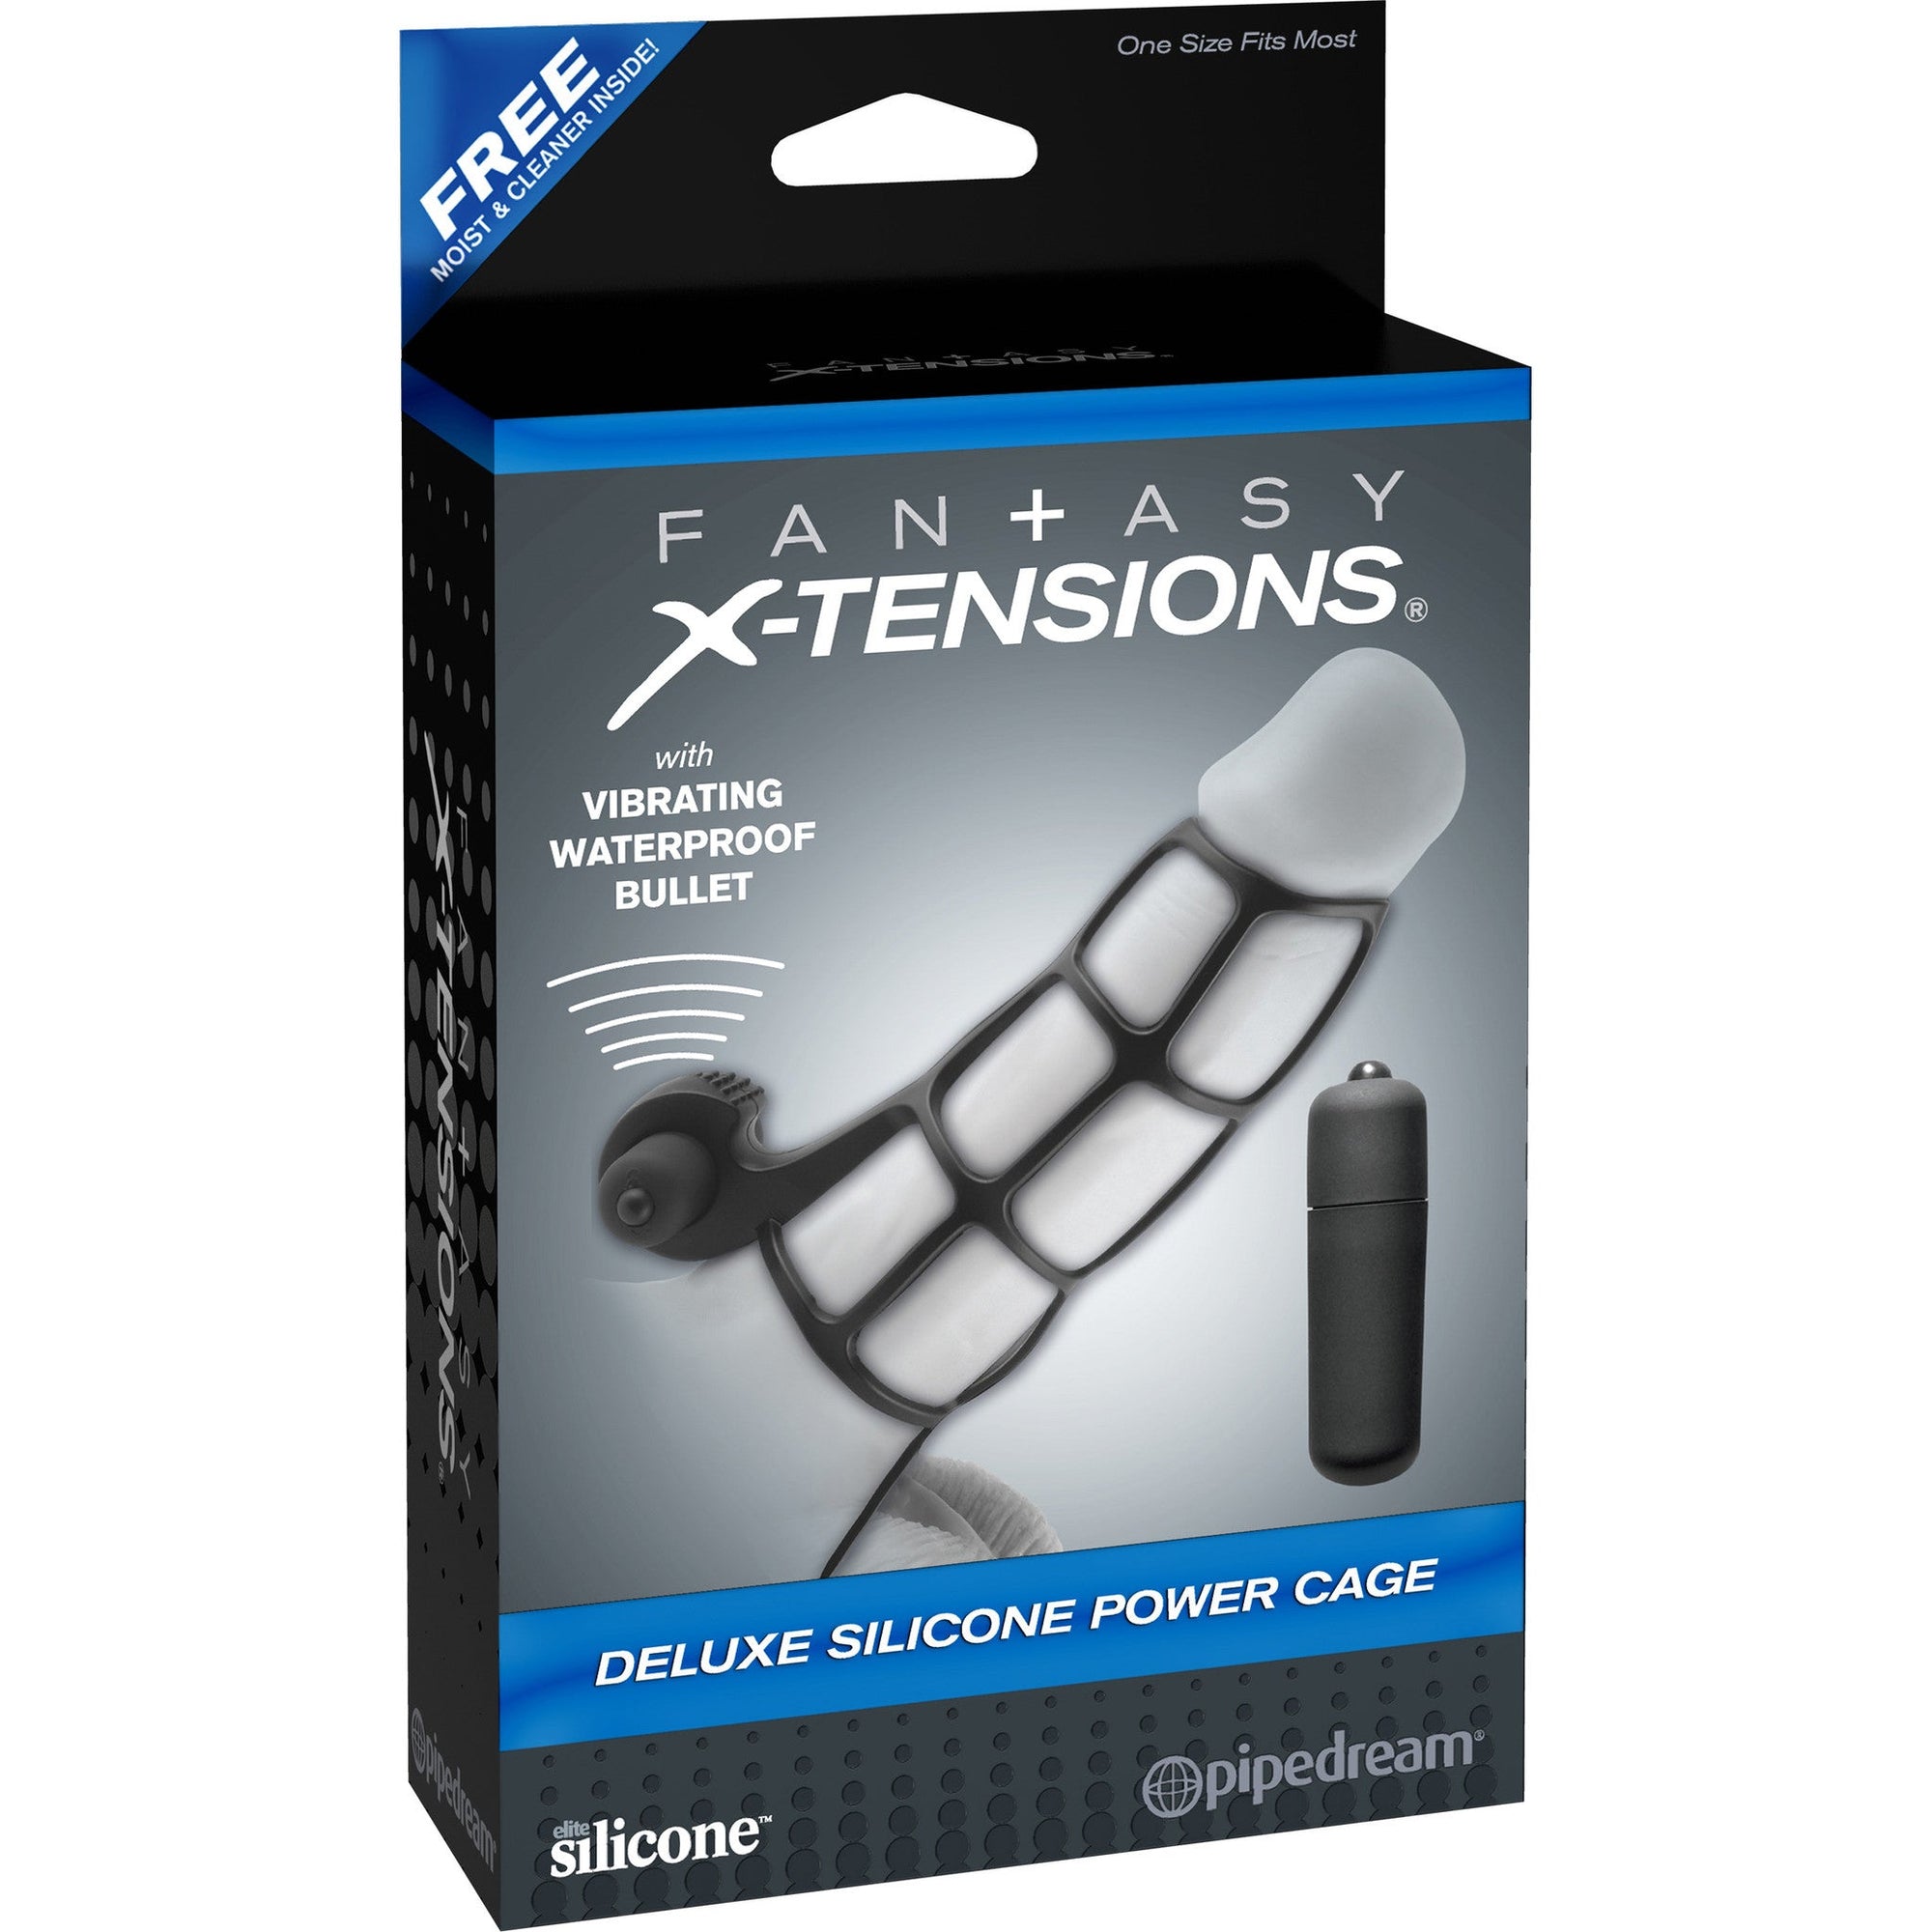 Pipedream - Fantasy X-tensions Deluxe Silicone Power Cage -  Cock Sleeves (Vibration) Non Rechargeable  Durio.sg